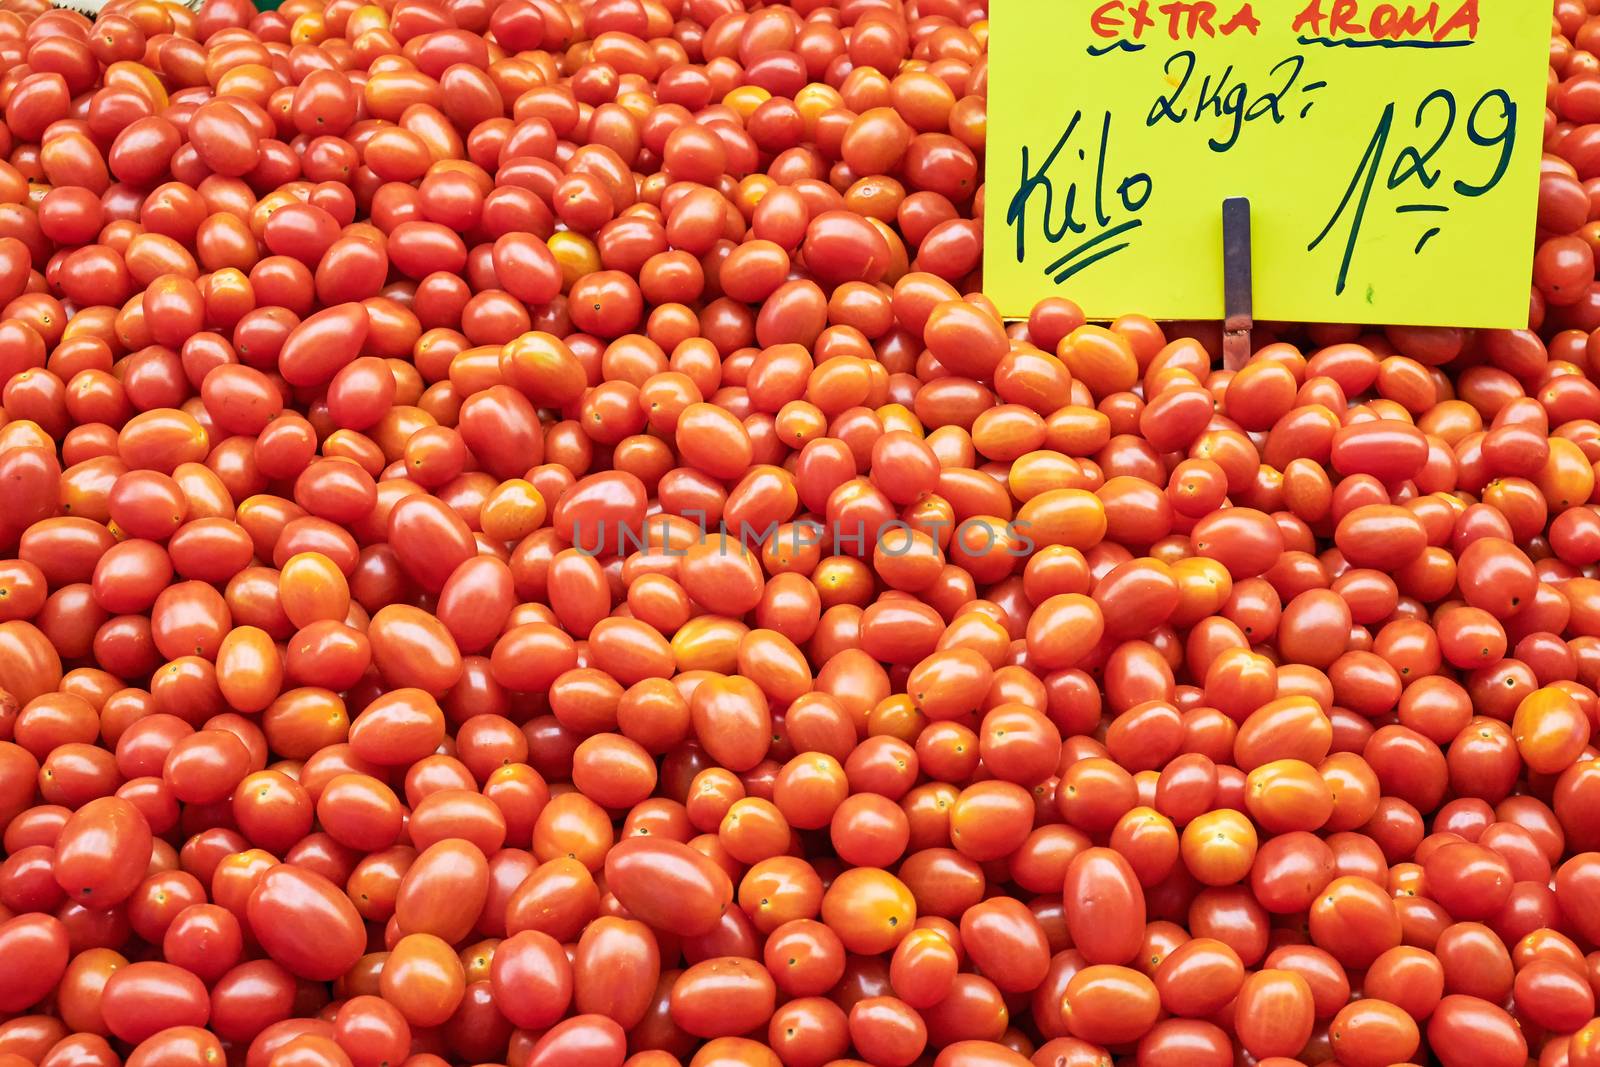 Pile of small tomatoes for sale at a market